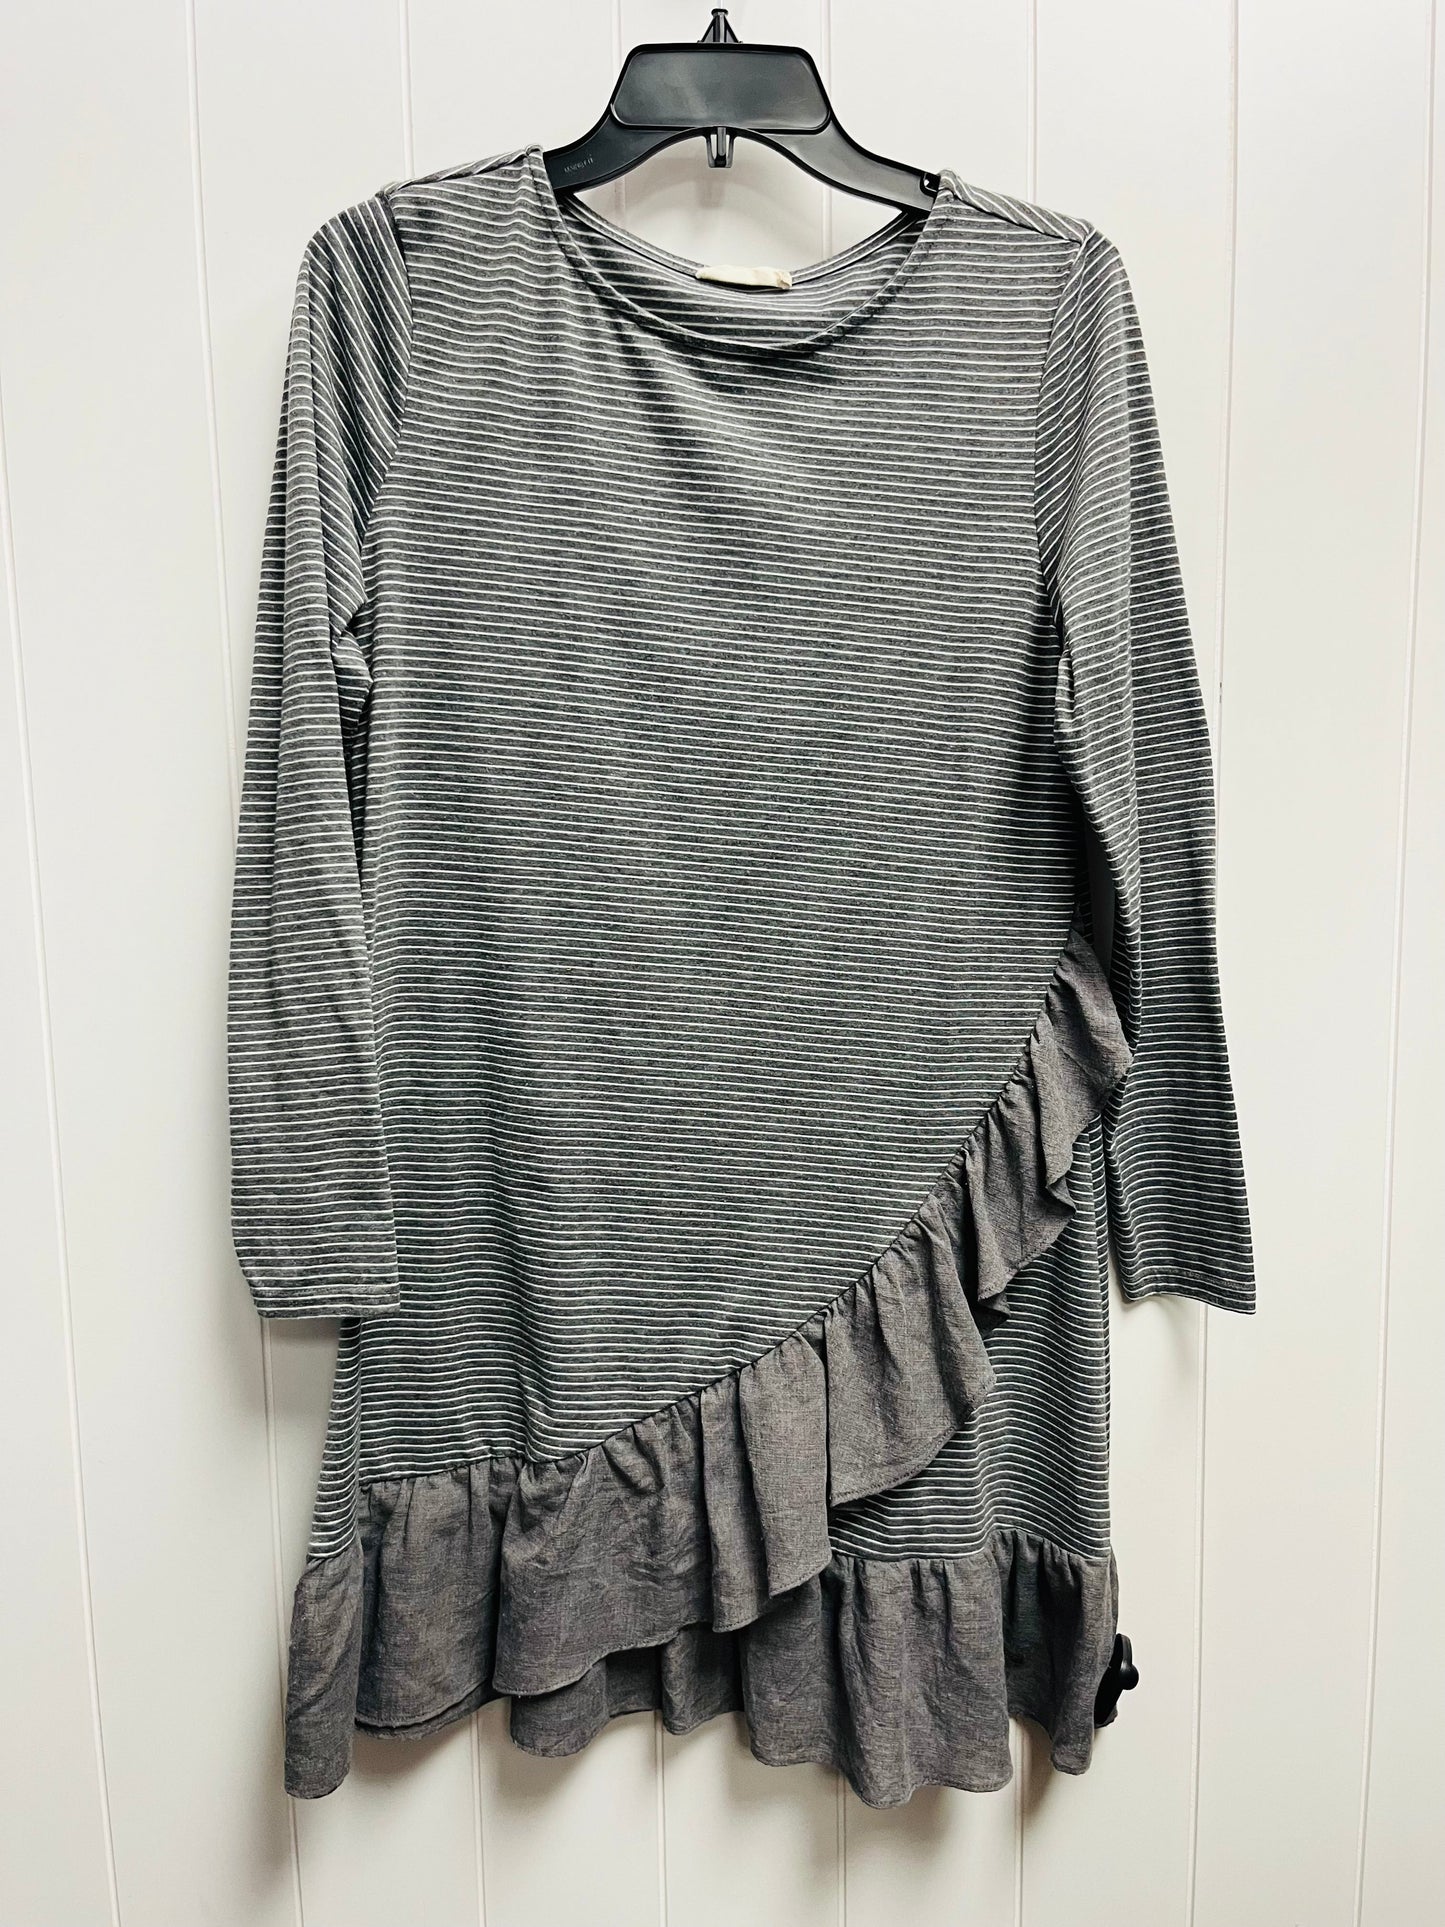 Grey & White Dress Casual Short Umgee, Size S